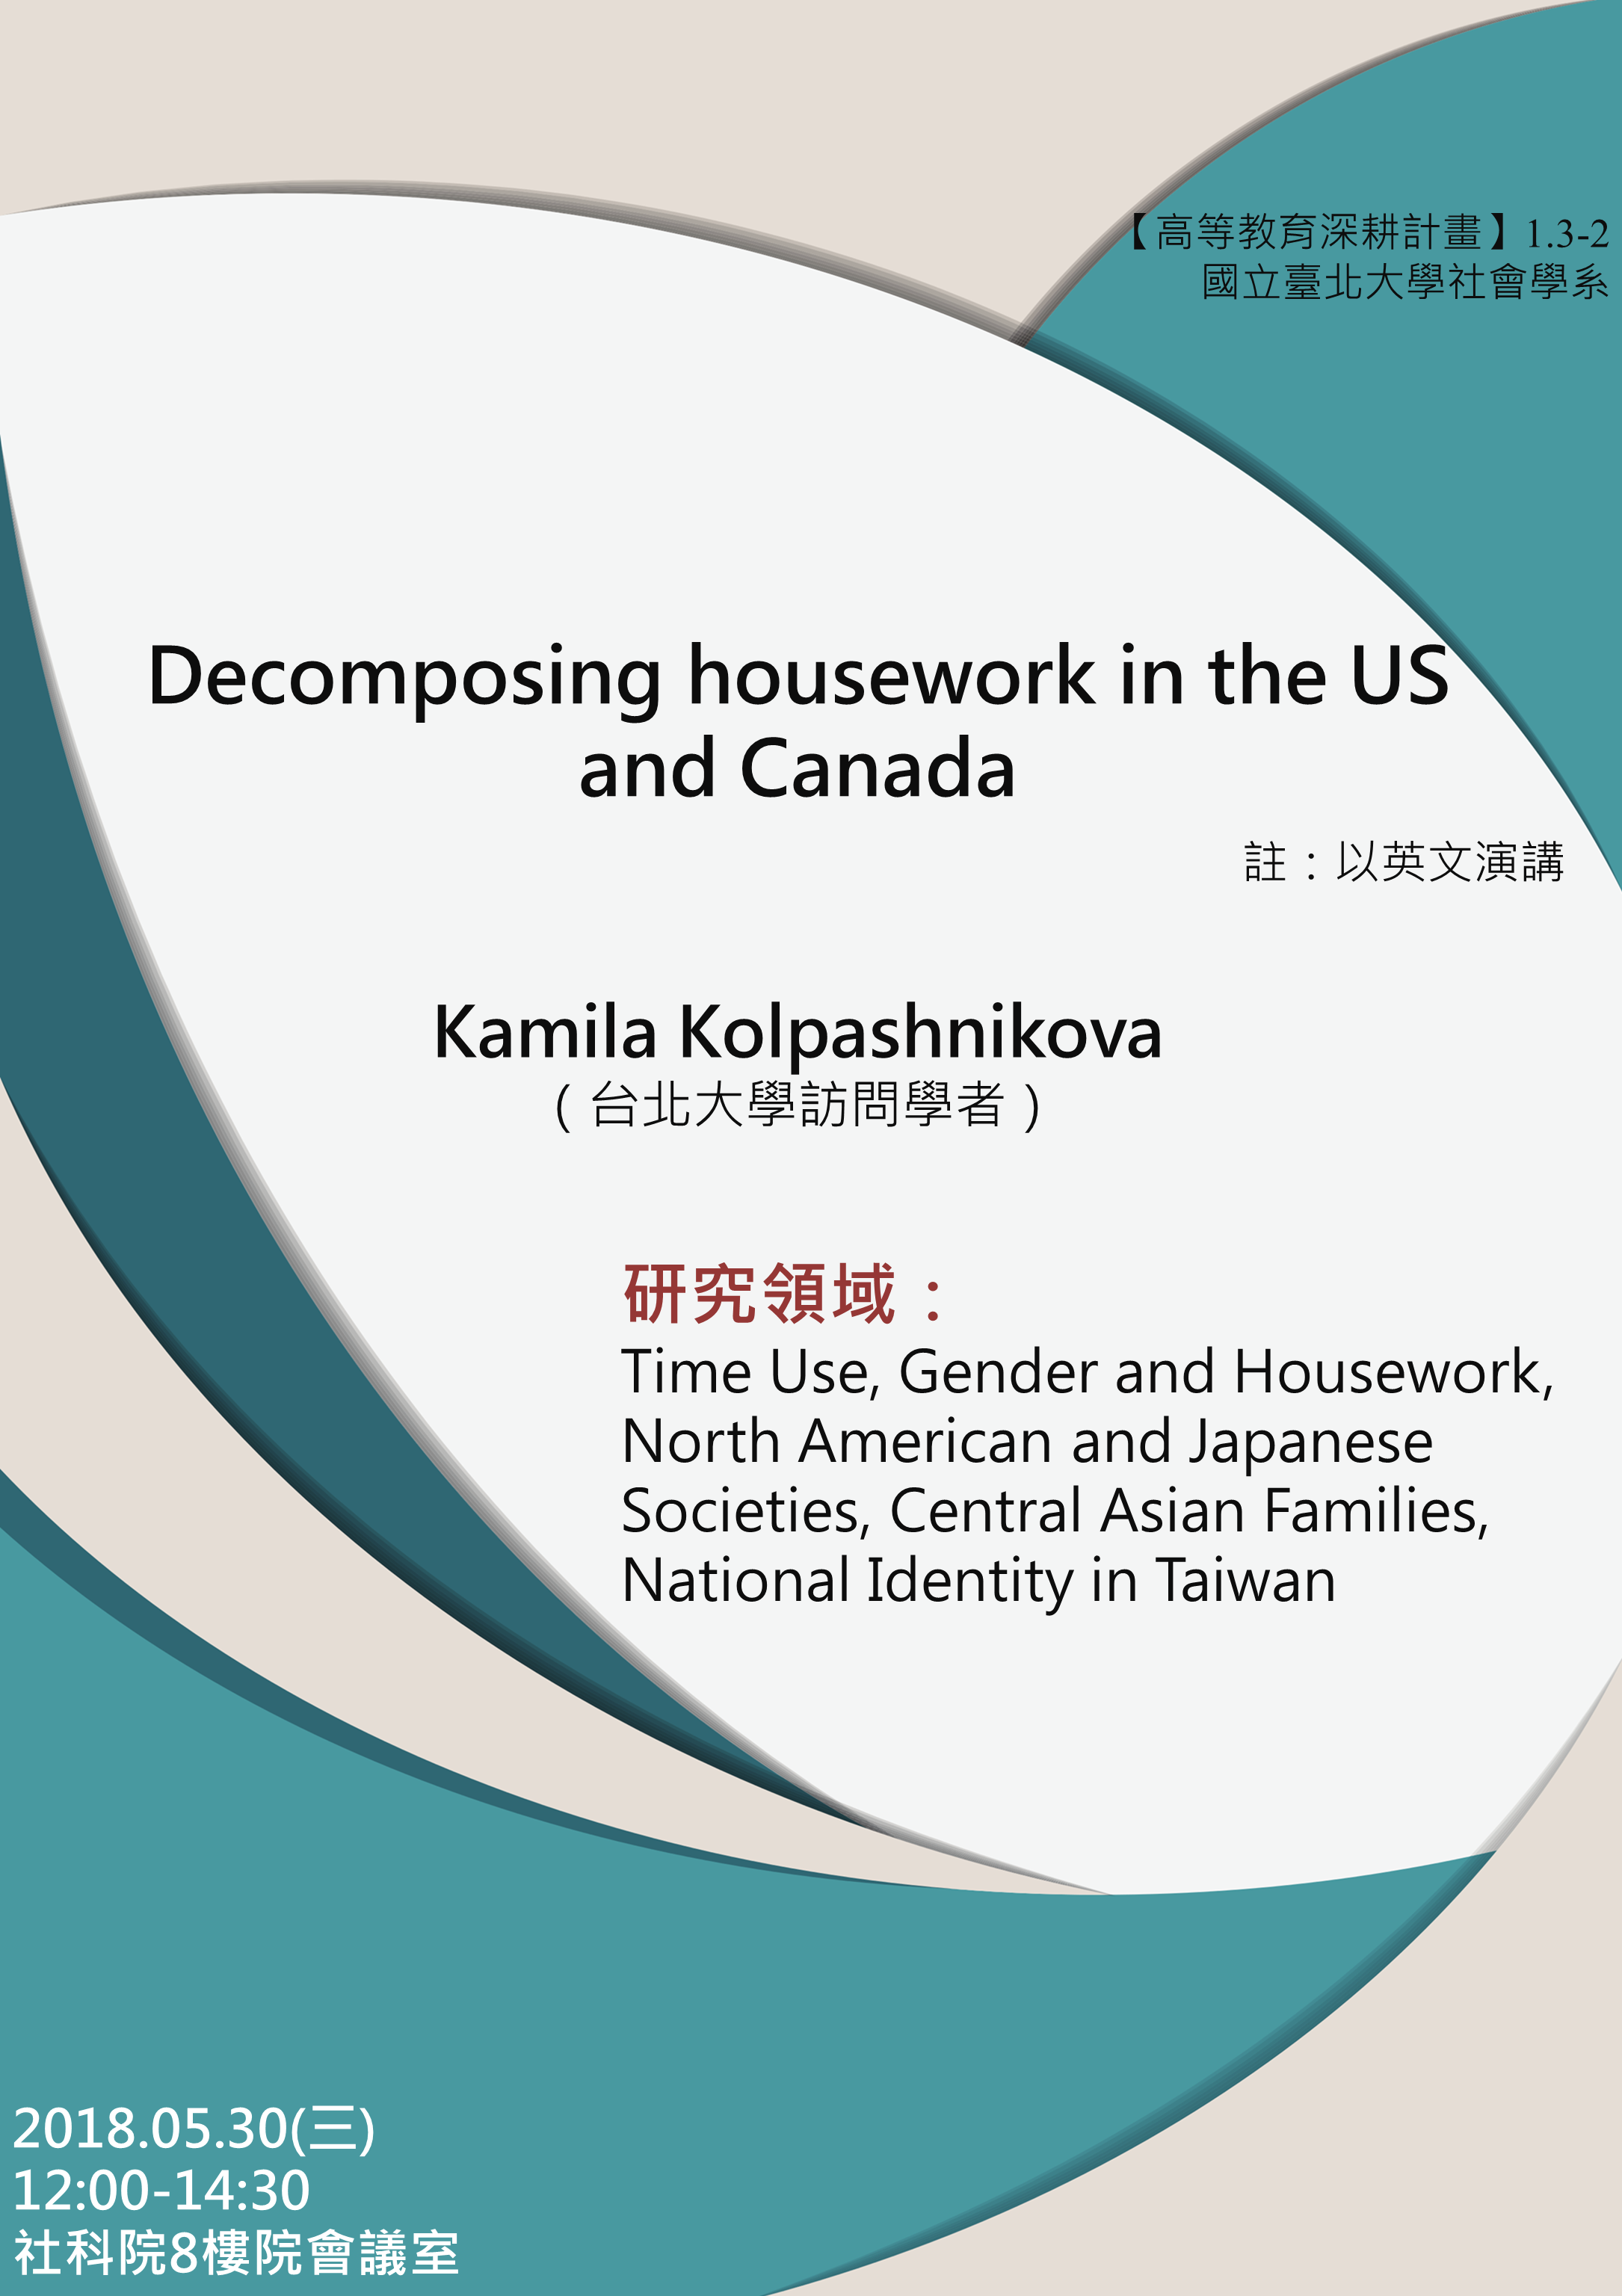 Decomposing housework in the US and Canada